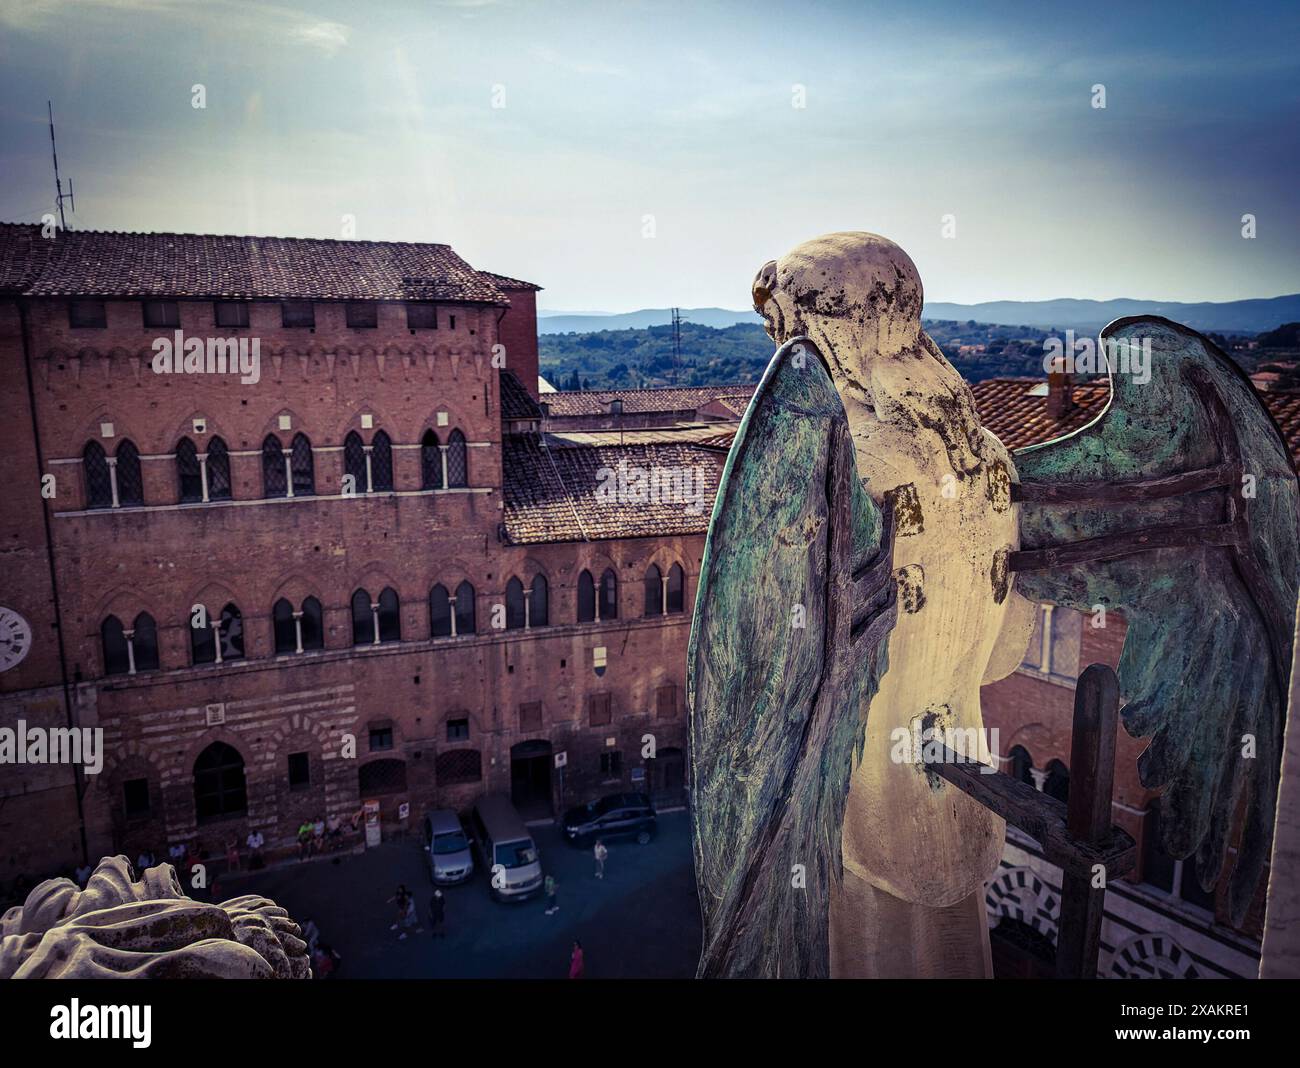 View over Siena from a window in the Siena cathedral, Italy Stock Photo